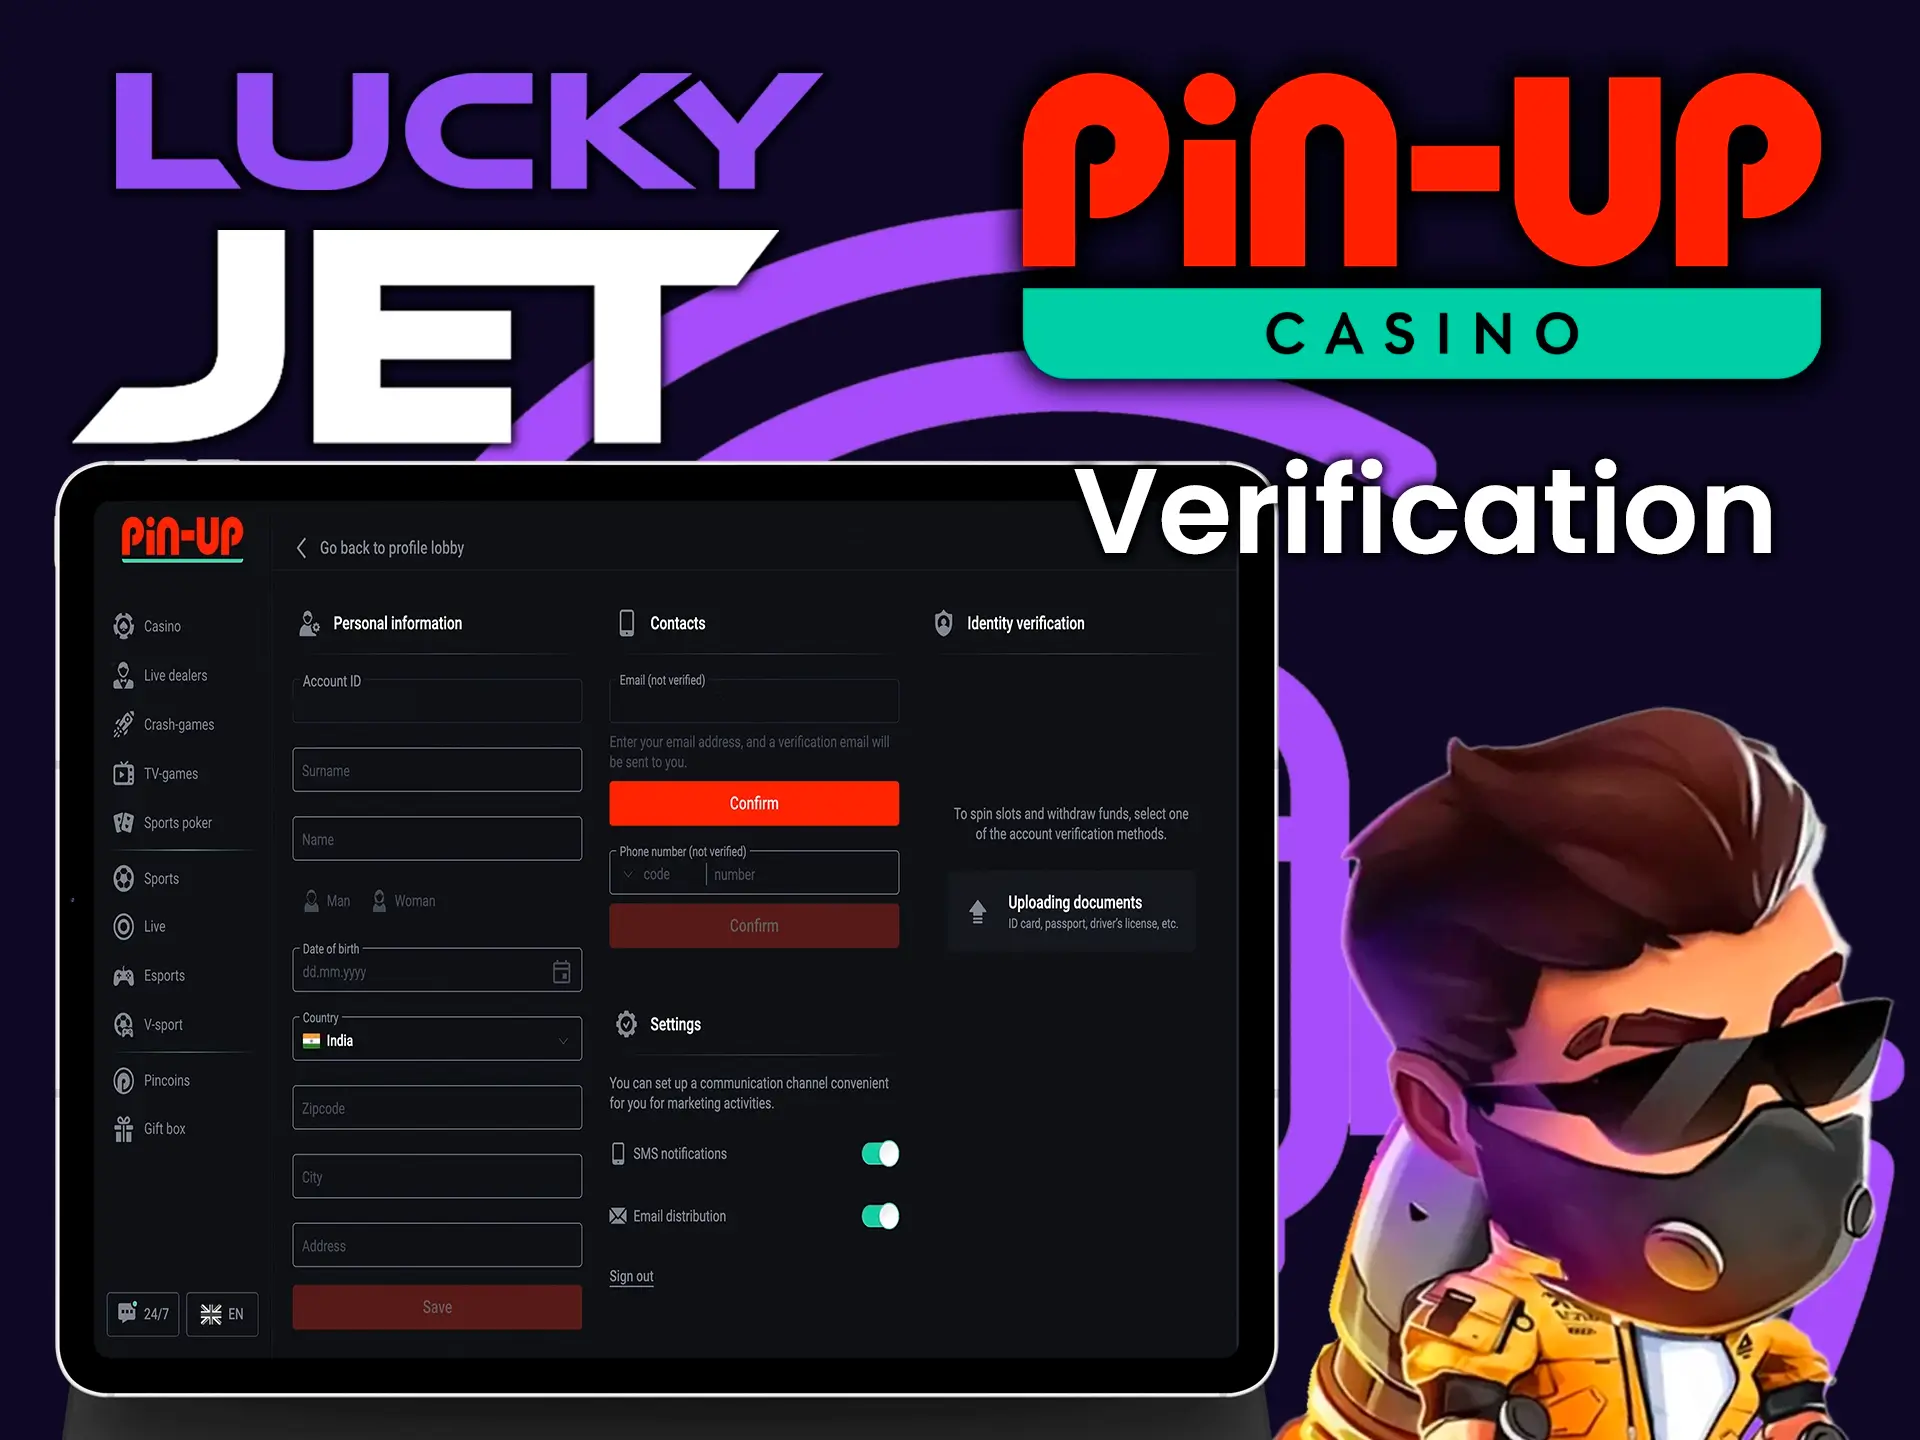 By filling in your personal data on the Pin Up service, you will be able to play Lucky Jet.